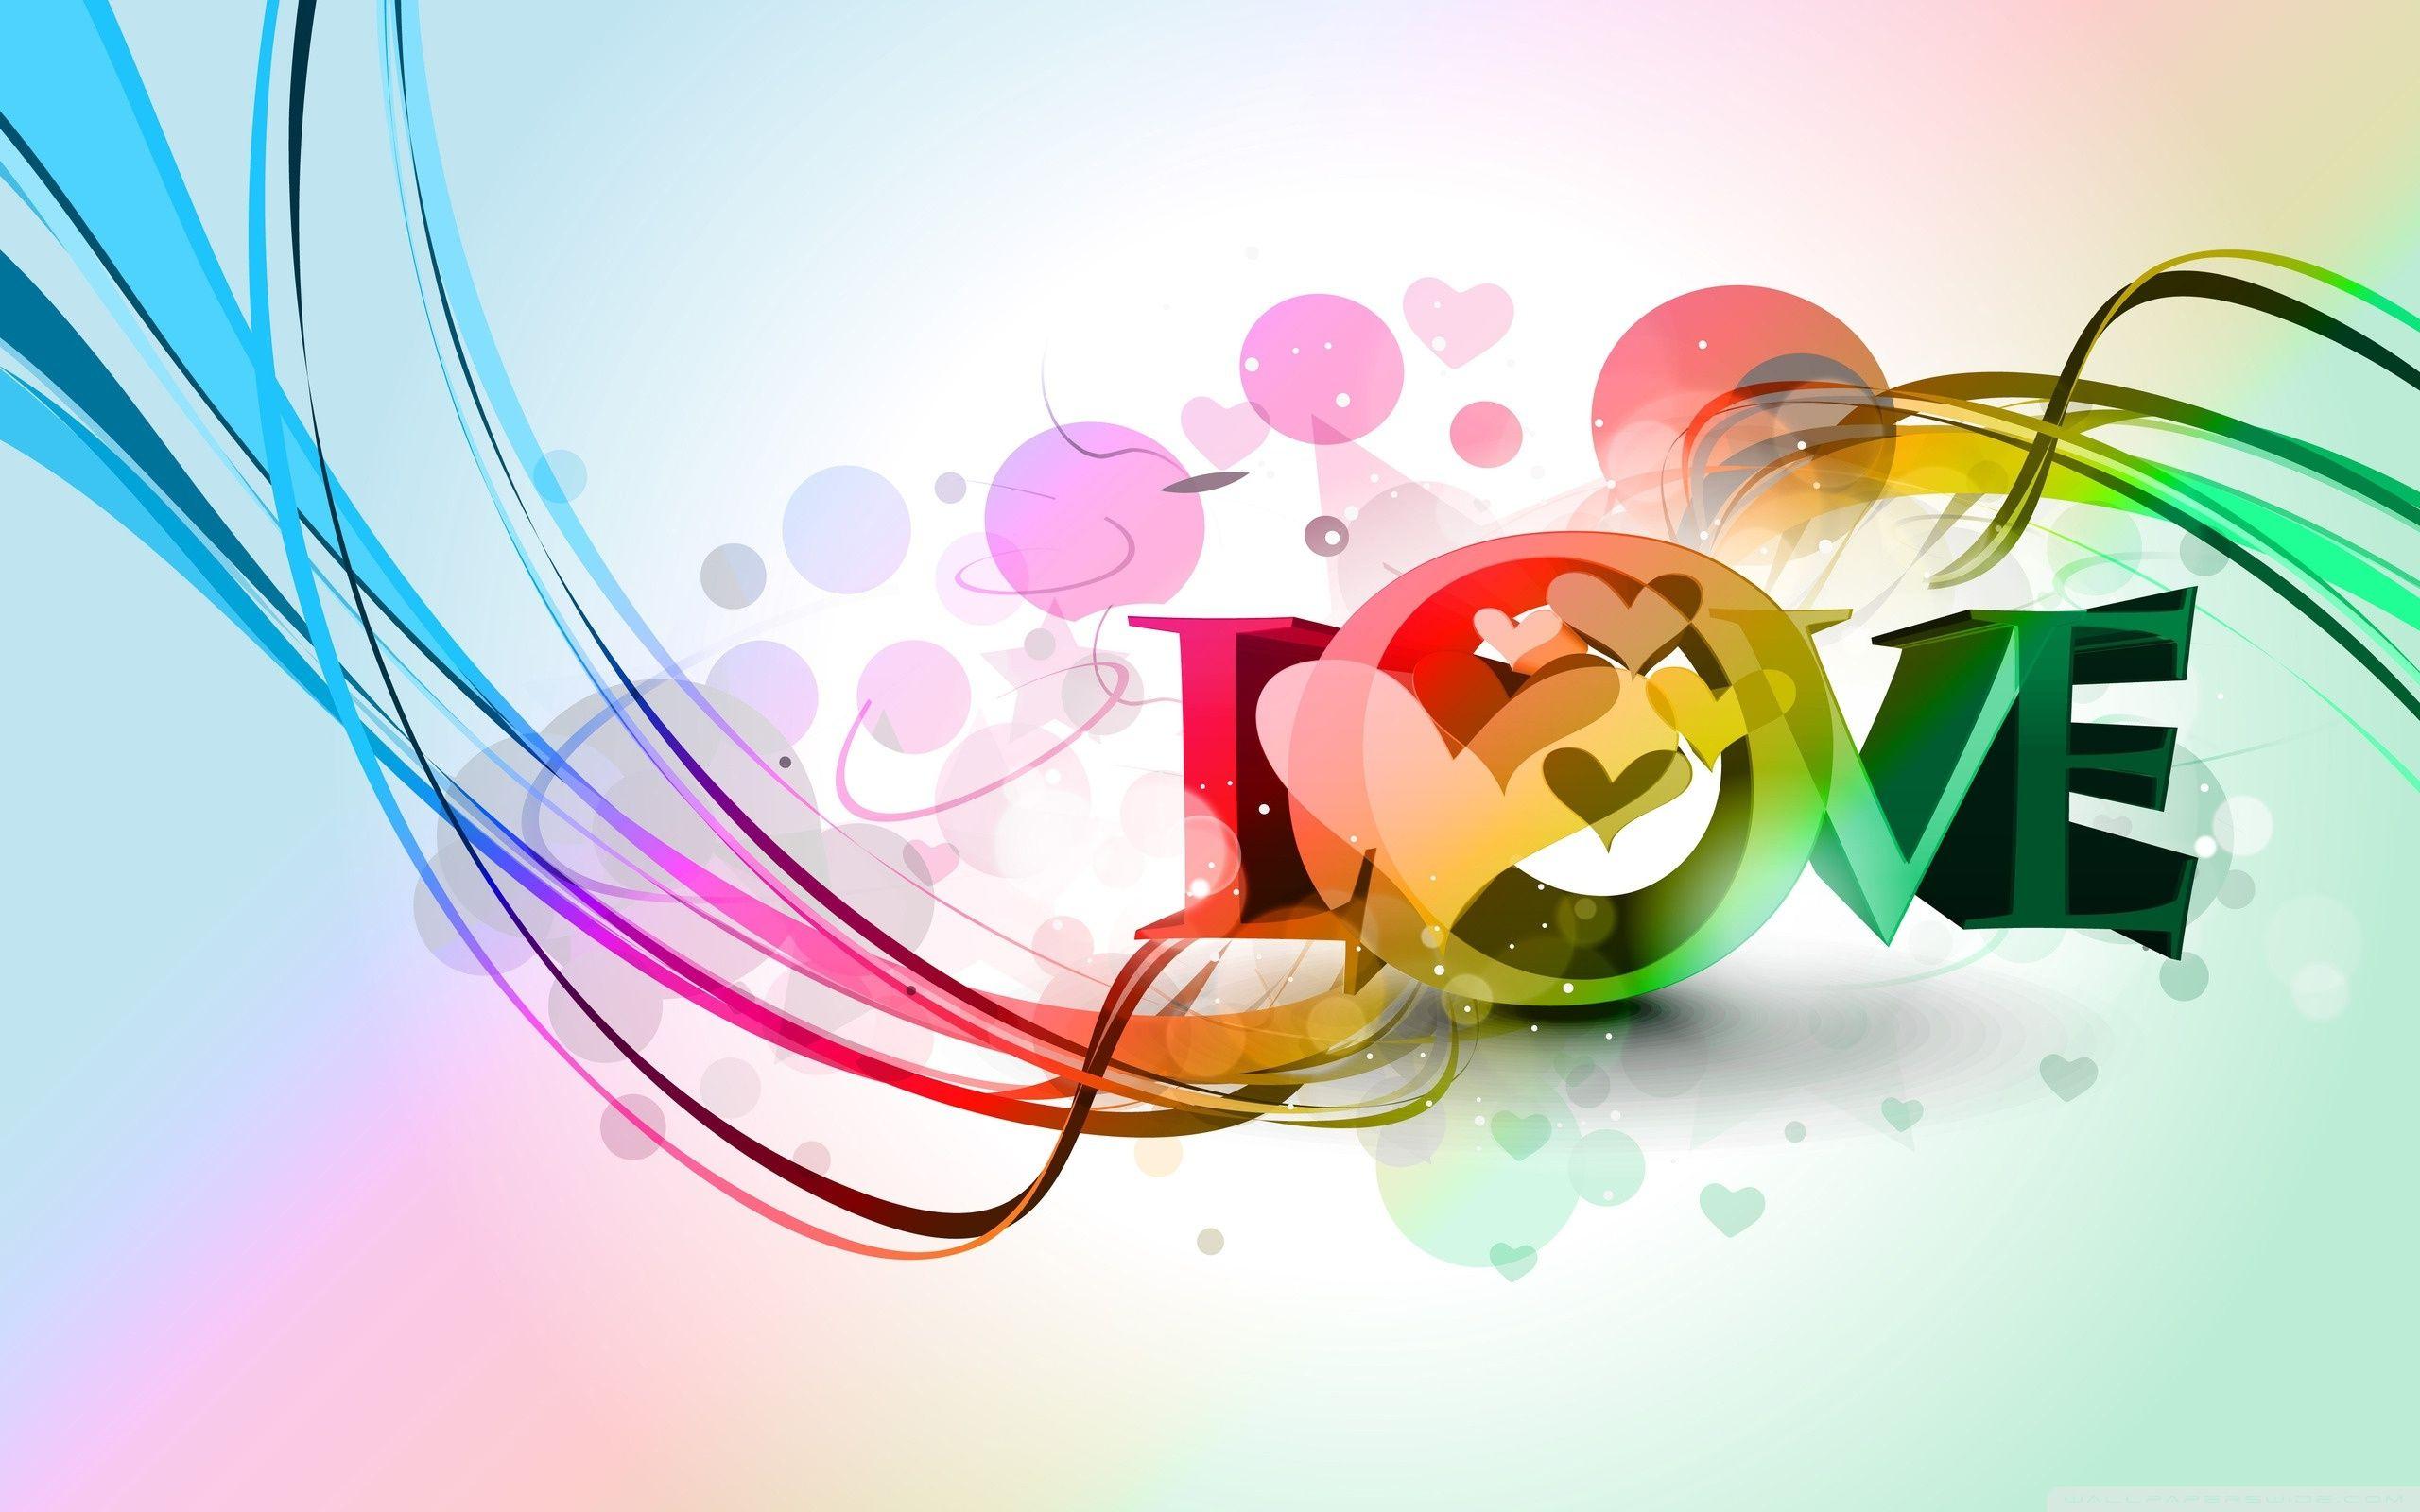 Find out: Love Rainbow wallpaper /love